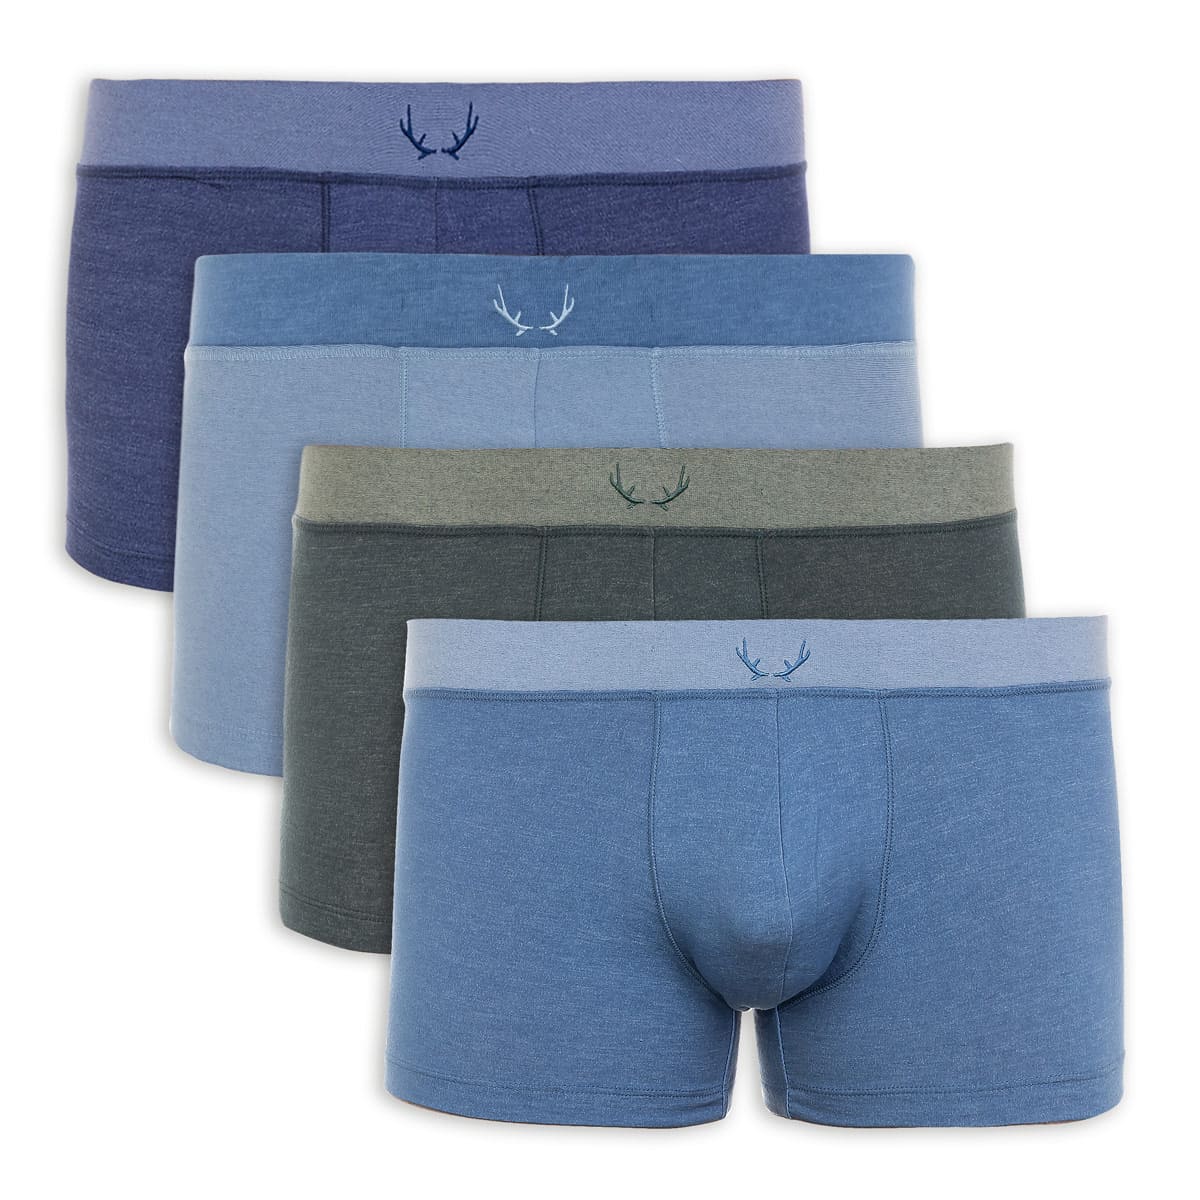 Boxer shorts 4-pack made of Tencel by Bluebuck